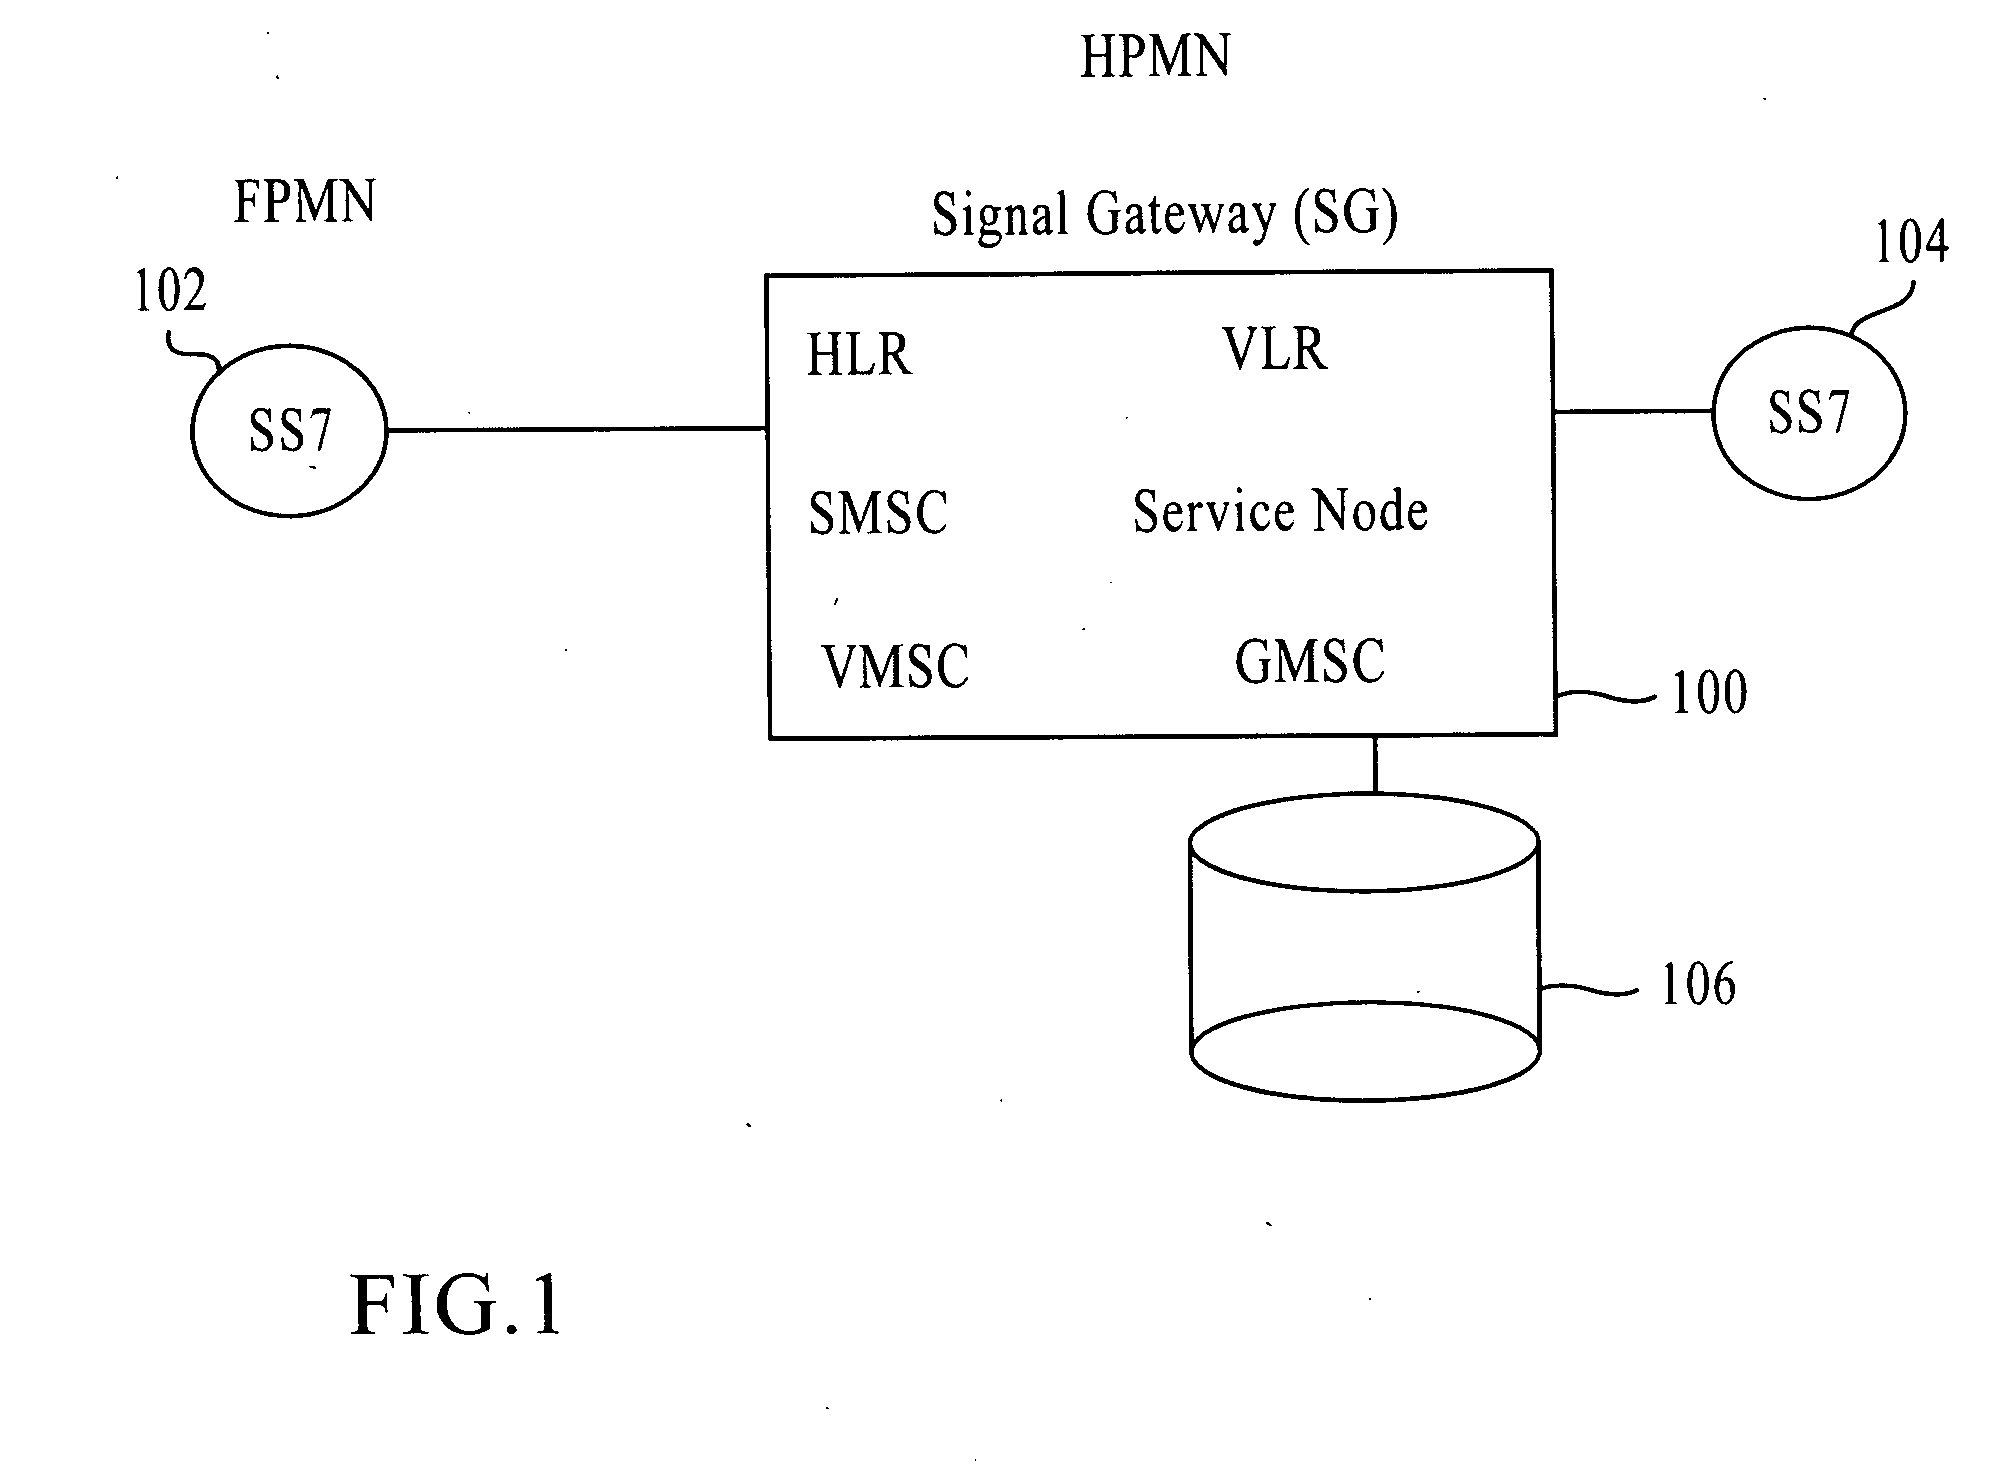 Signaling gateway with Multiple IMSI with Multiple MSISDN (MIMM) service in a single SIM for multiple roaming partners